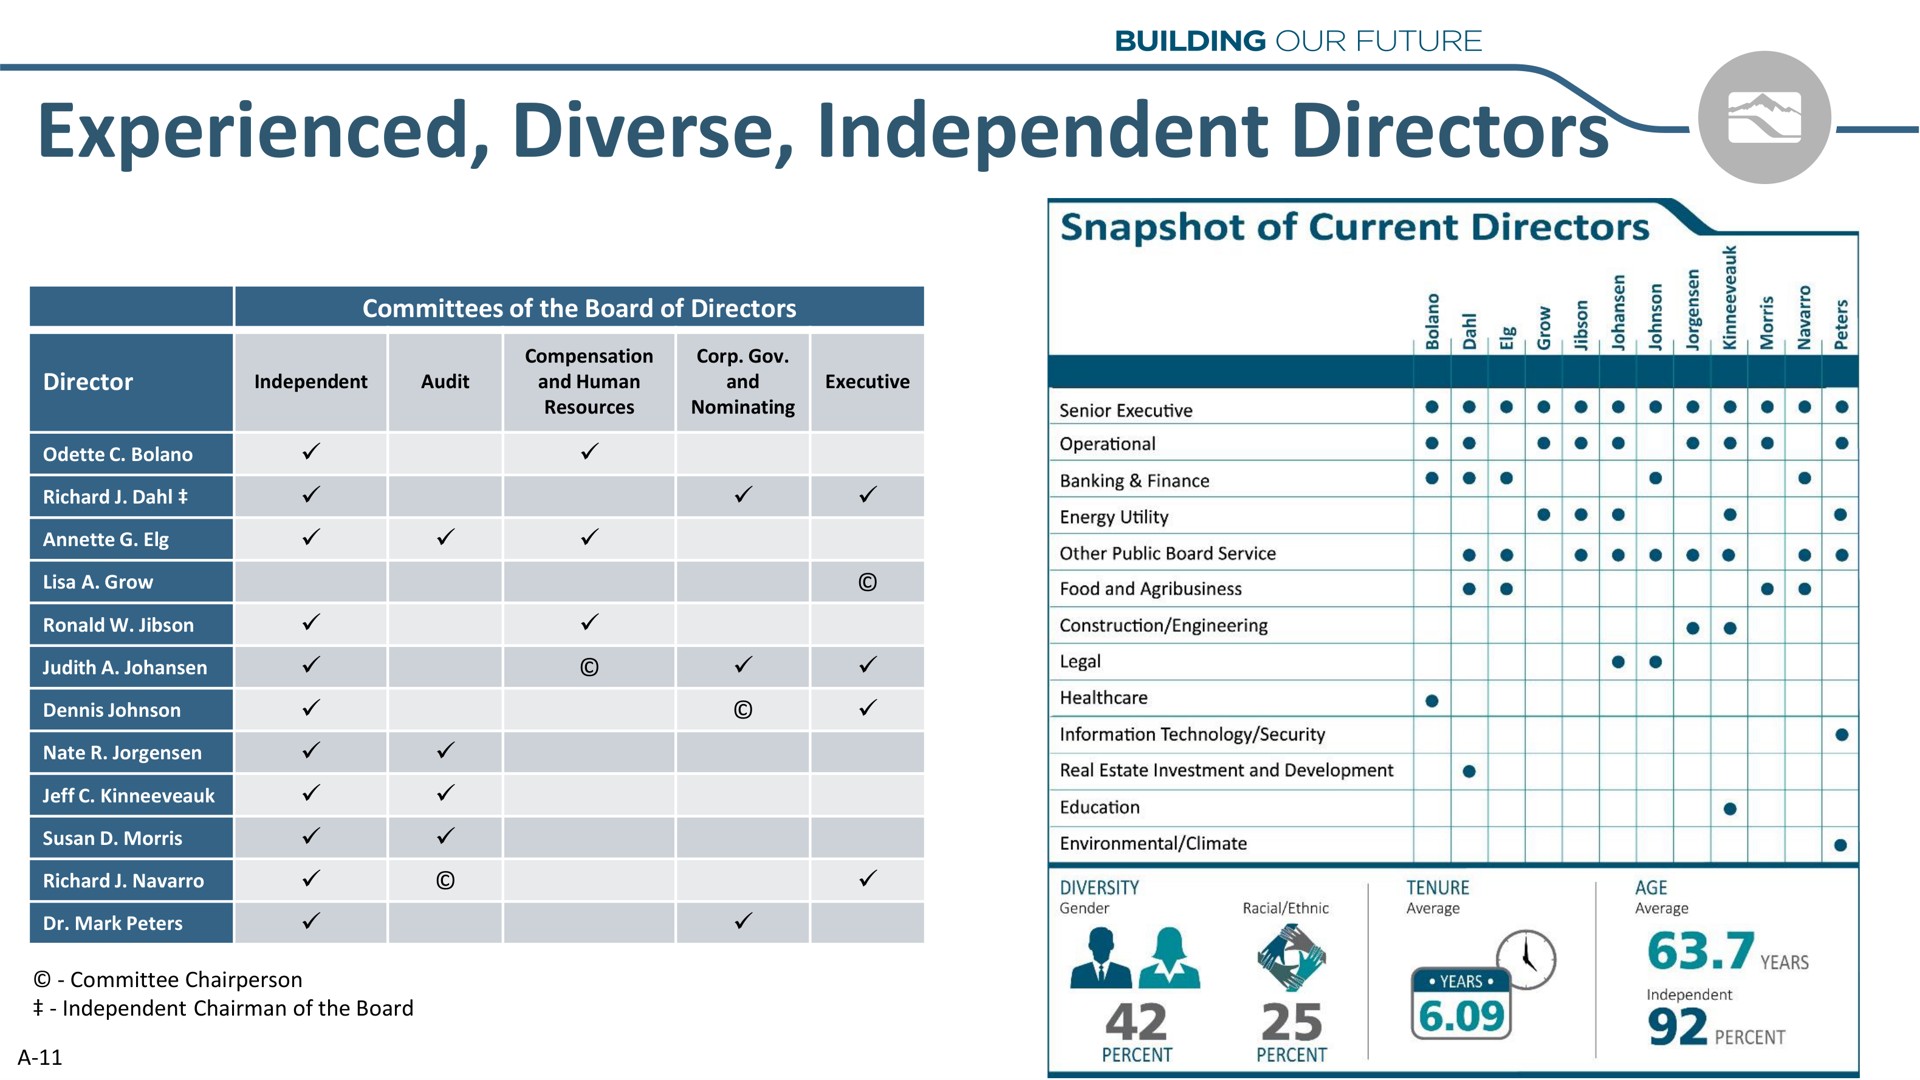 experienced diverse independent directors race | Idacorp